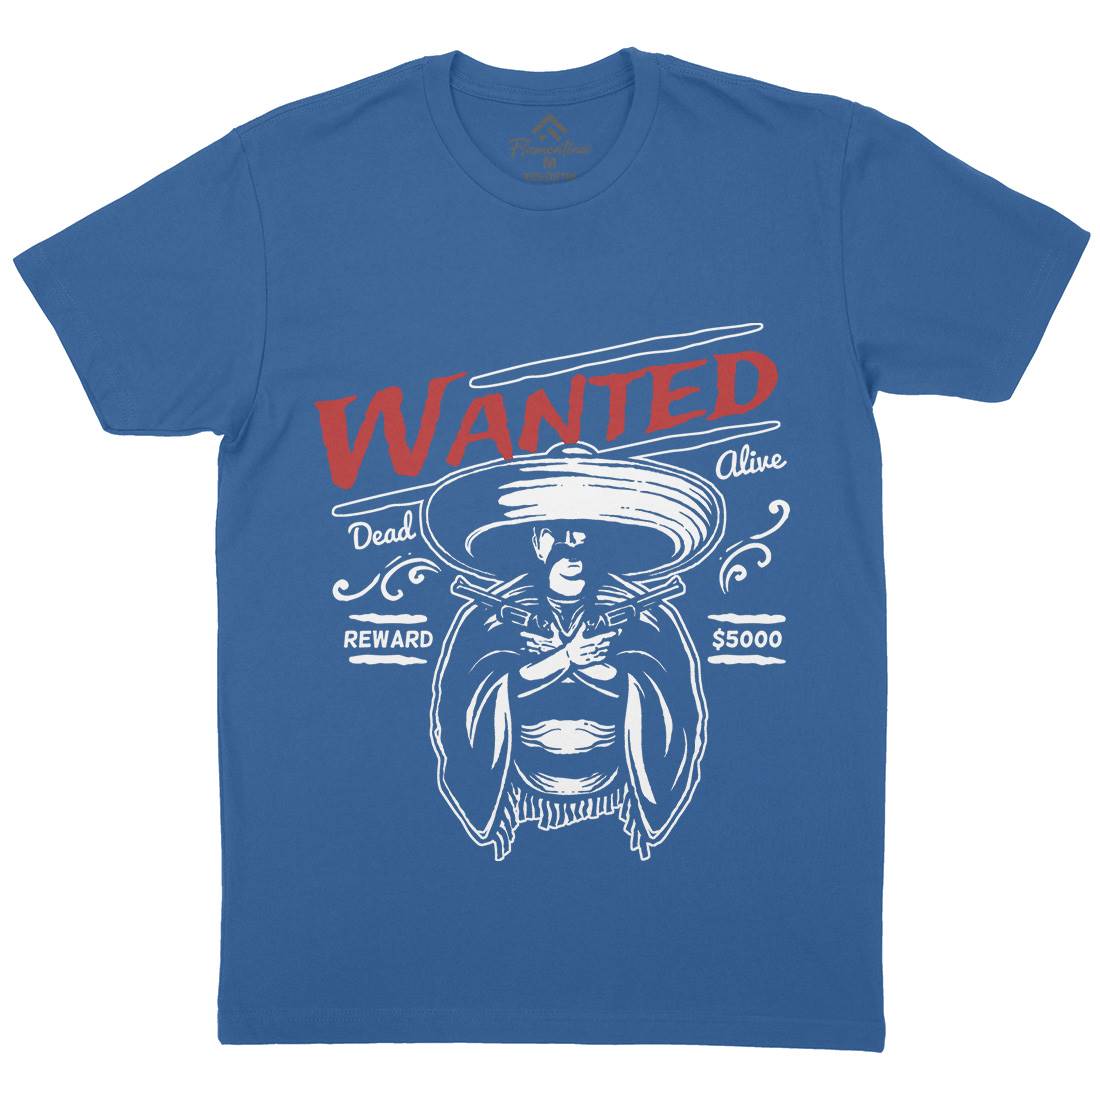 Wanted Mens Crew Neck T-Shirt American A391